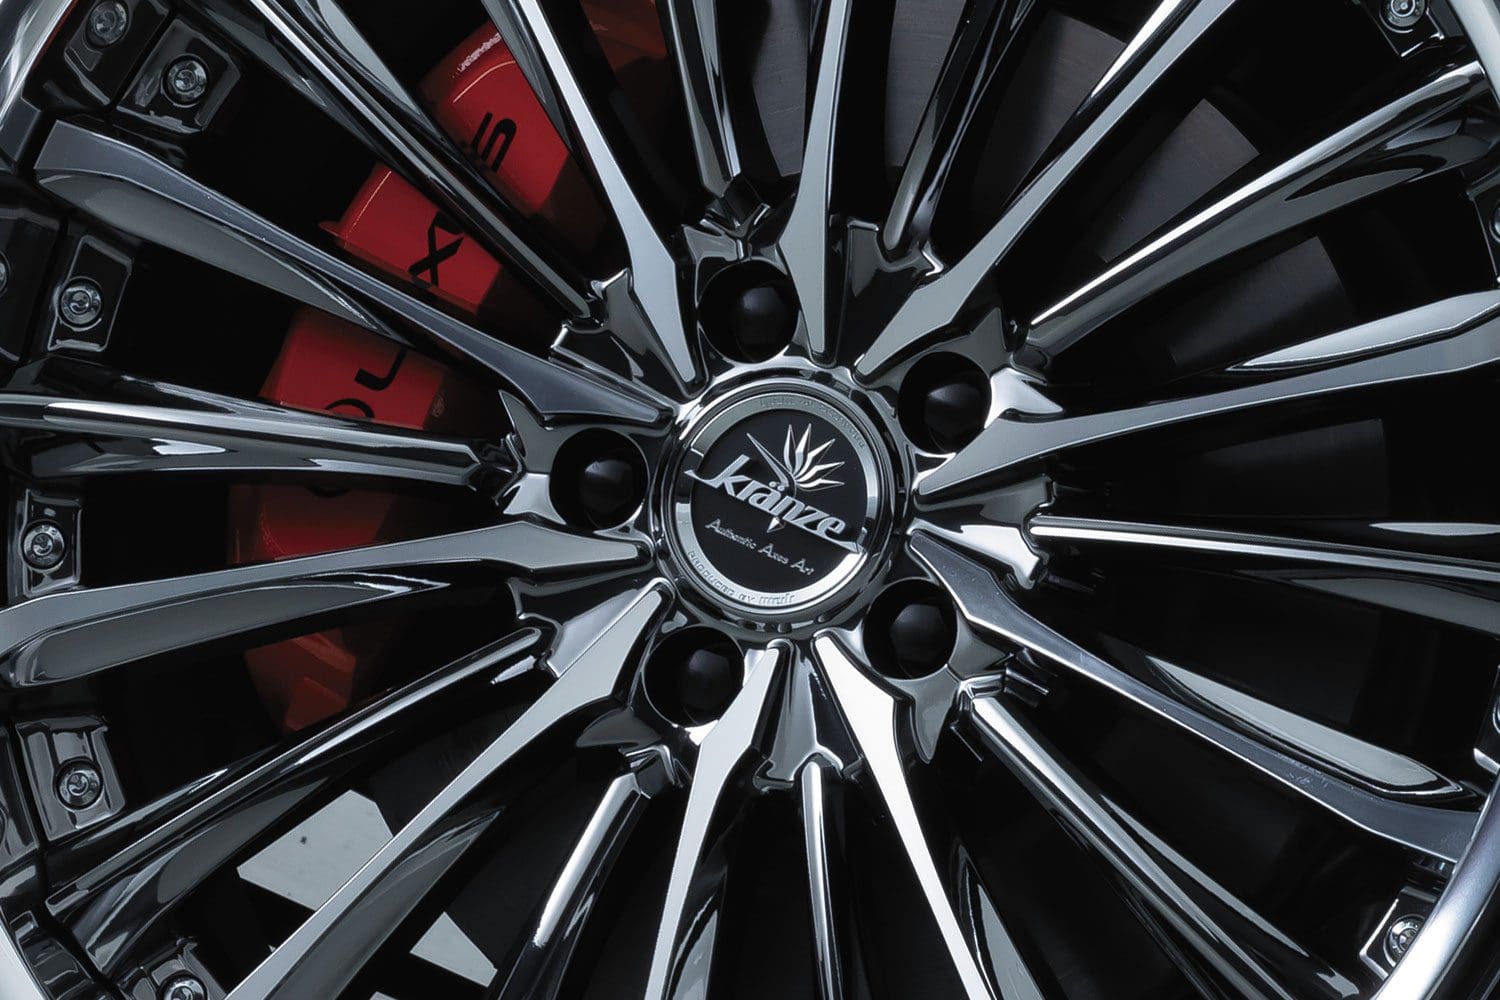 A close up of a chrome wheel with red accents.